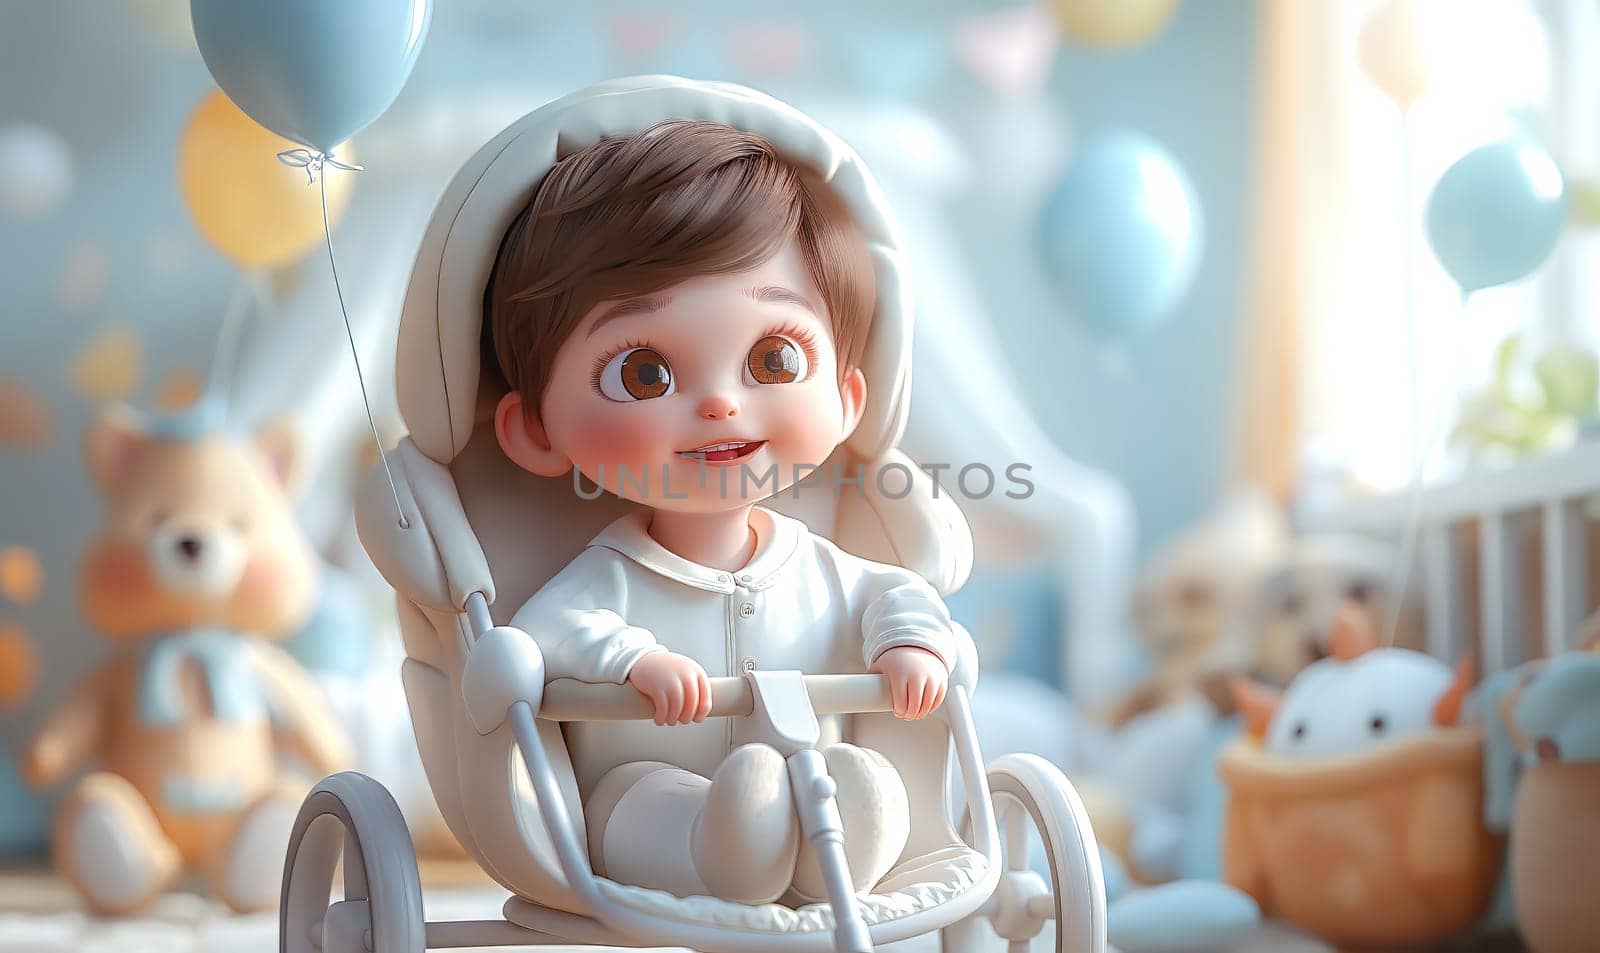 Illustration of a child sitting in a stroller in a room. Selective soft focus.